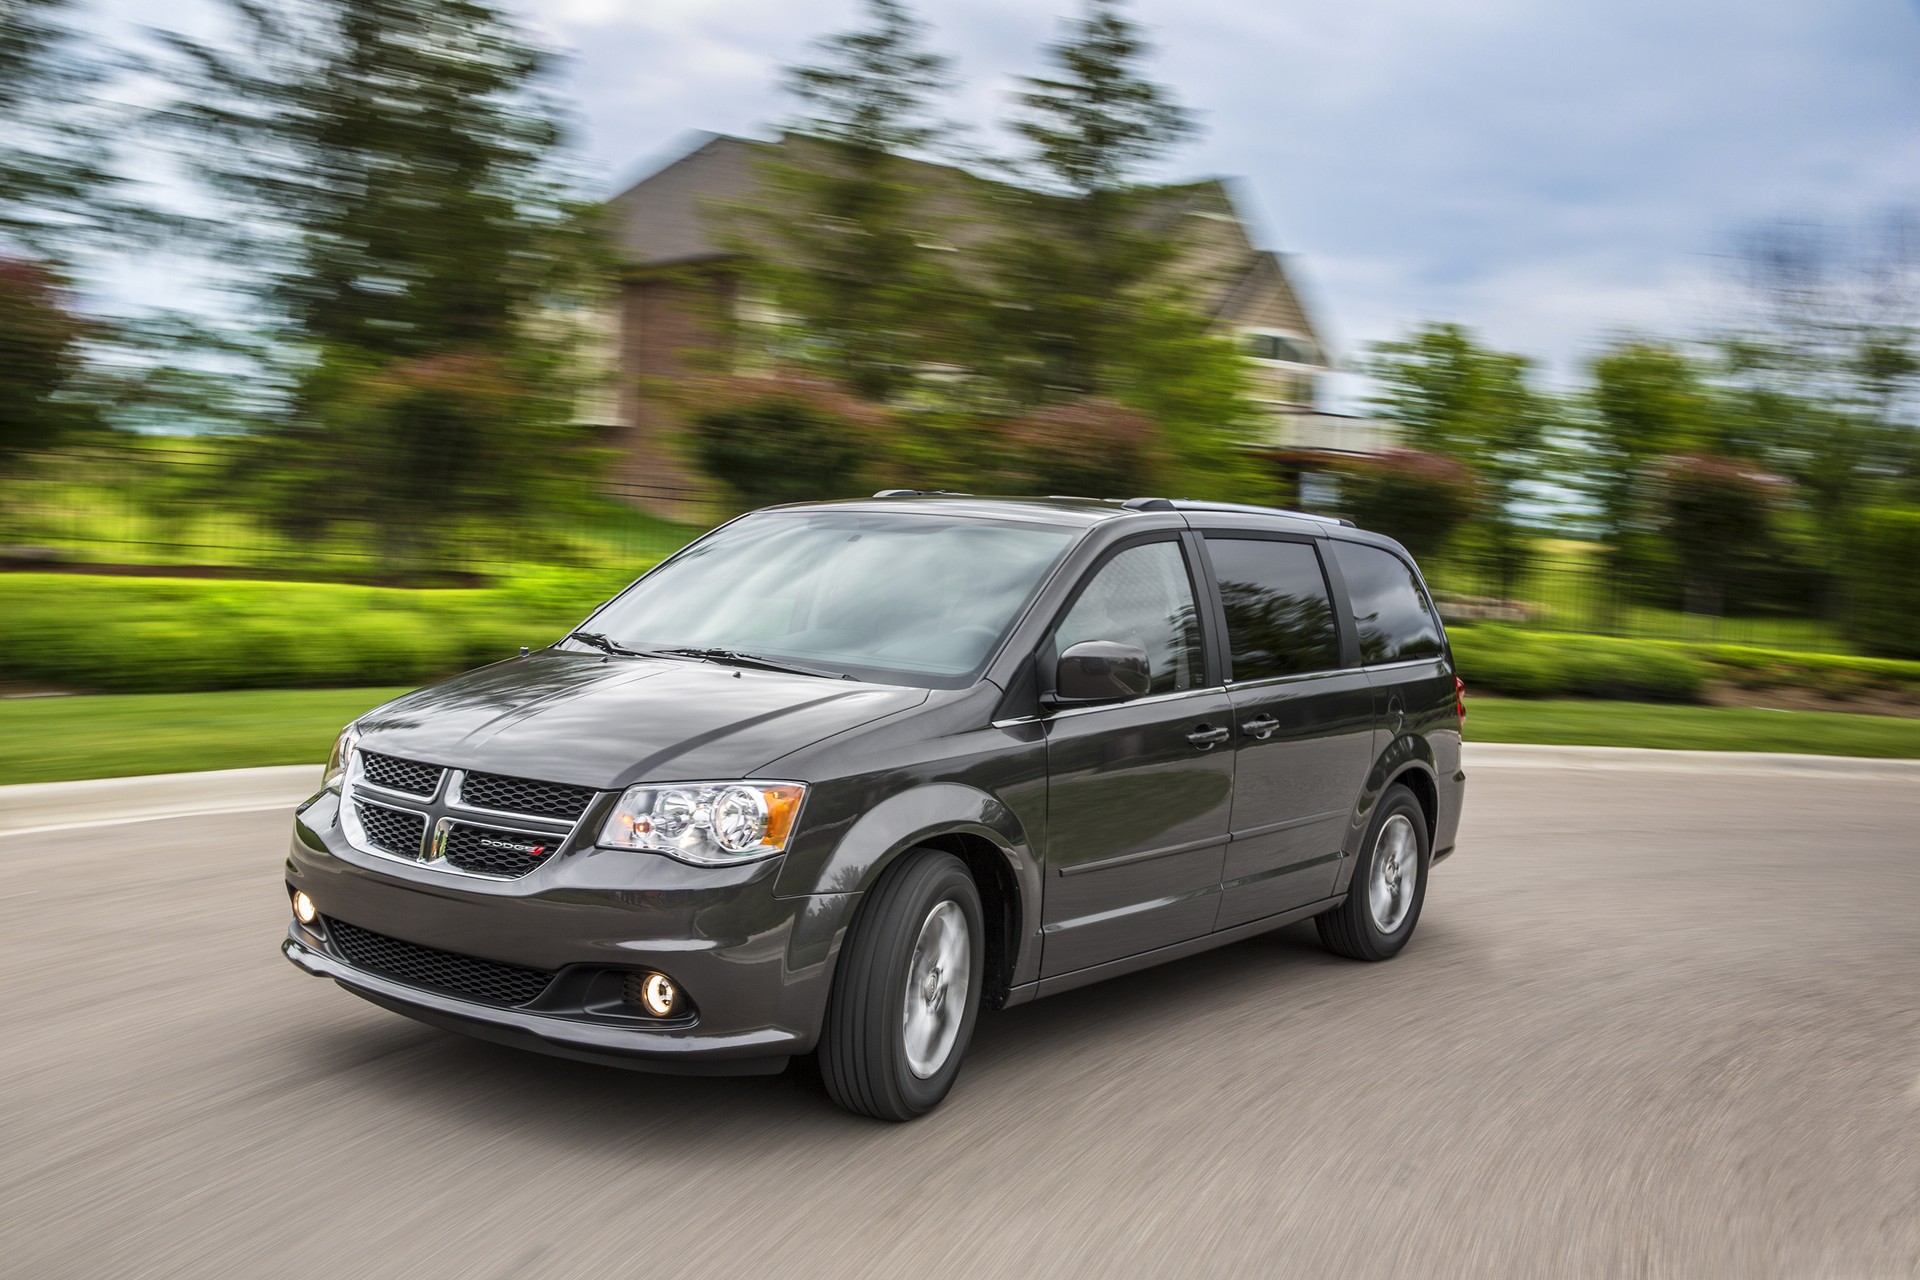 2016 Dodge Grand Caravan Review, Ratings, Specs, Prices, and Photos ...